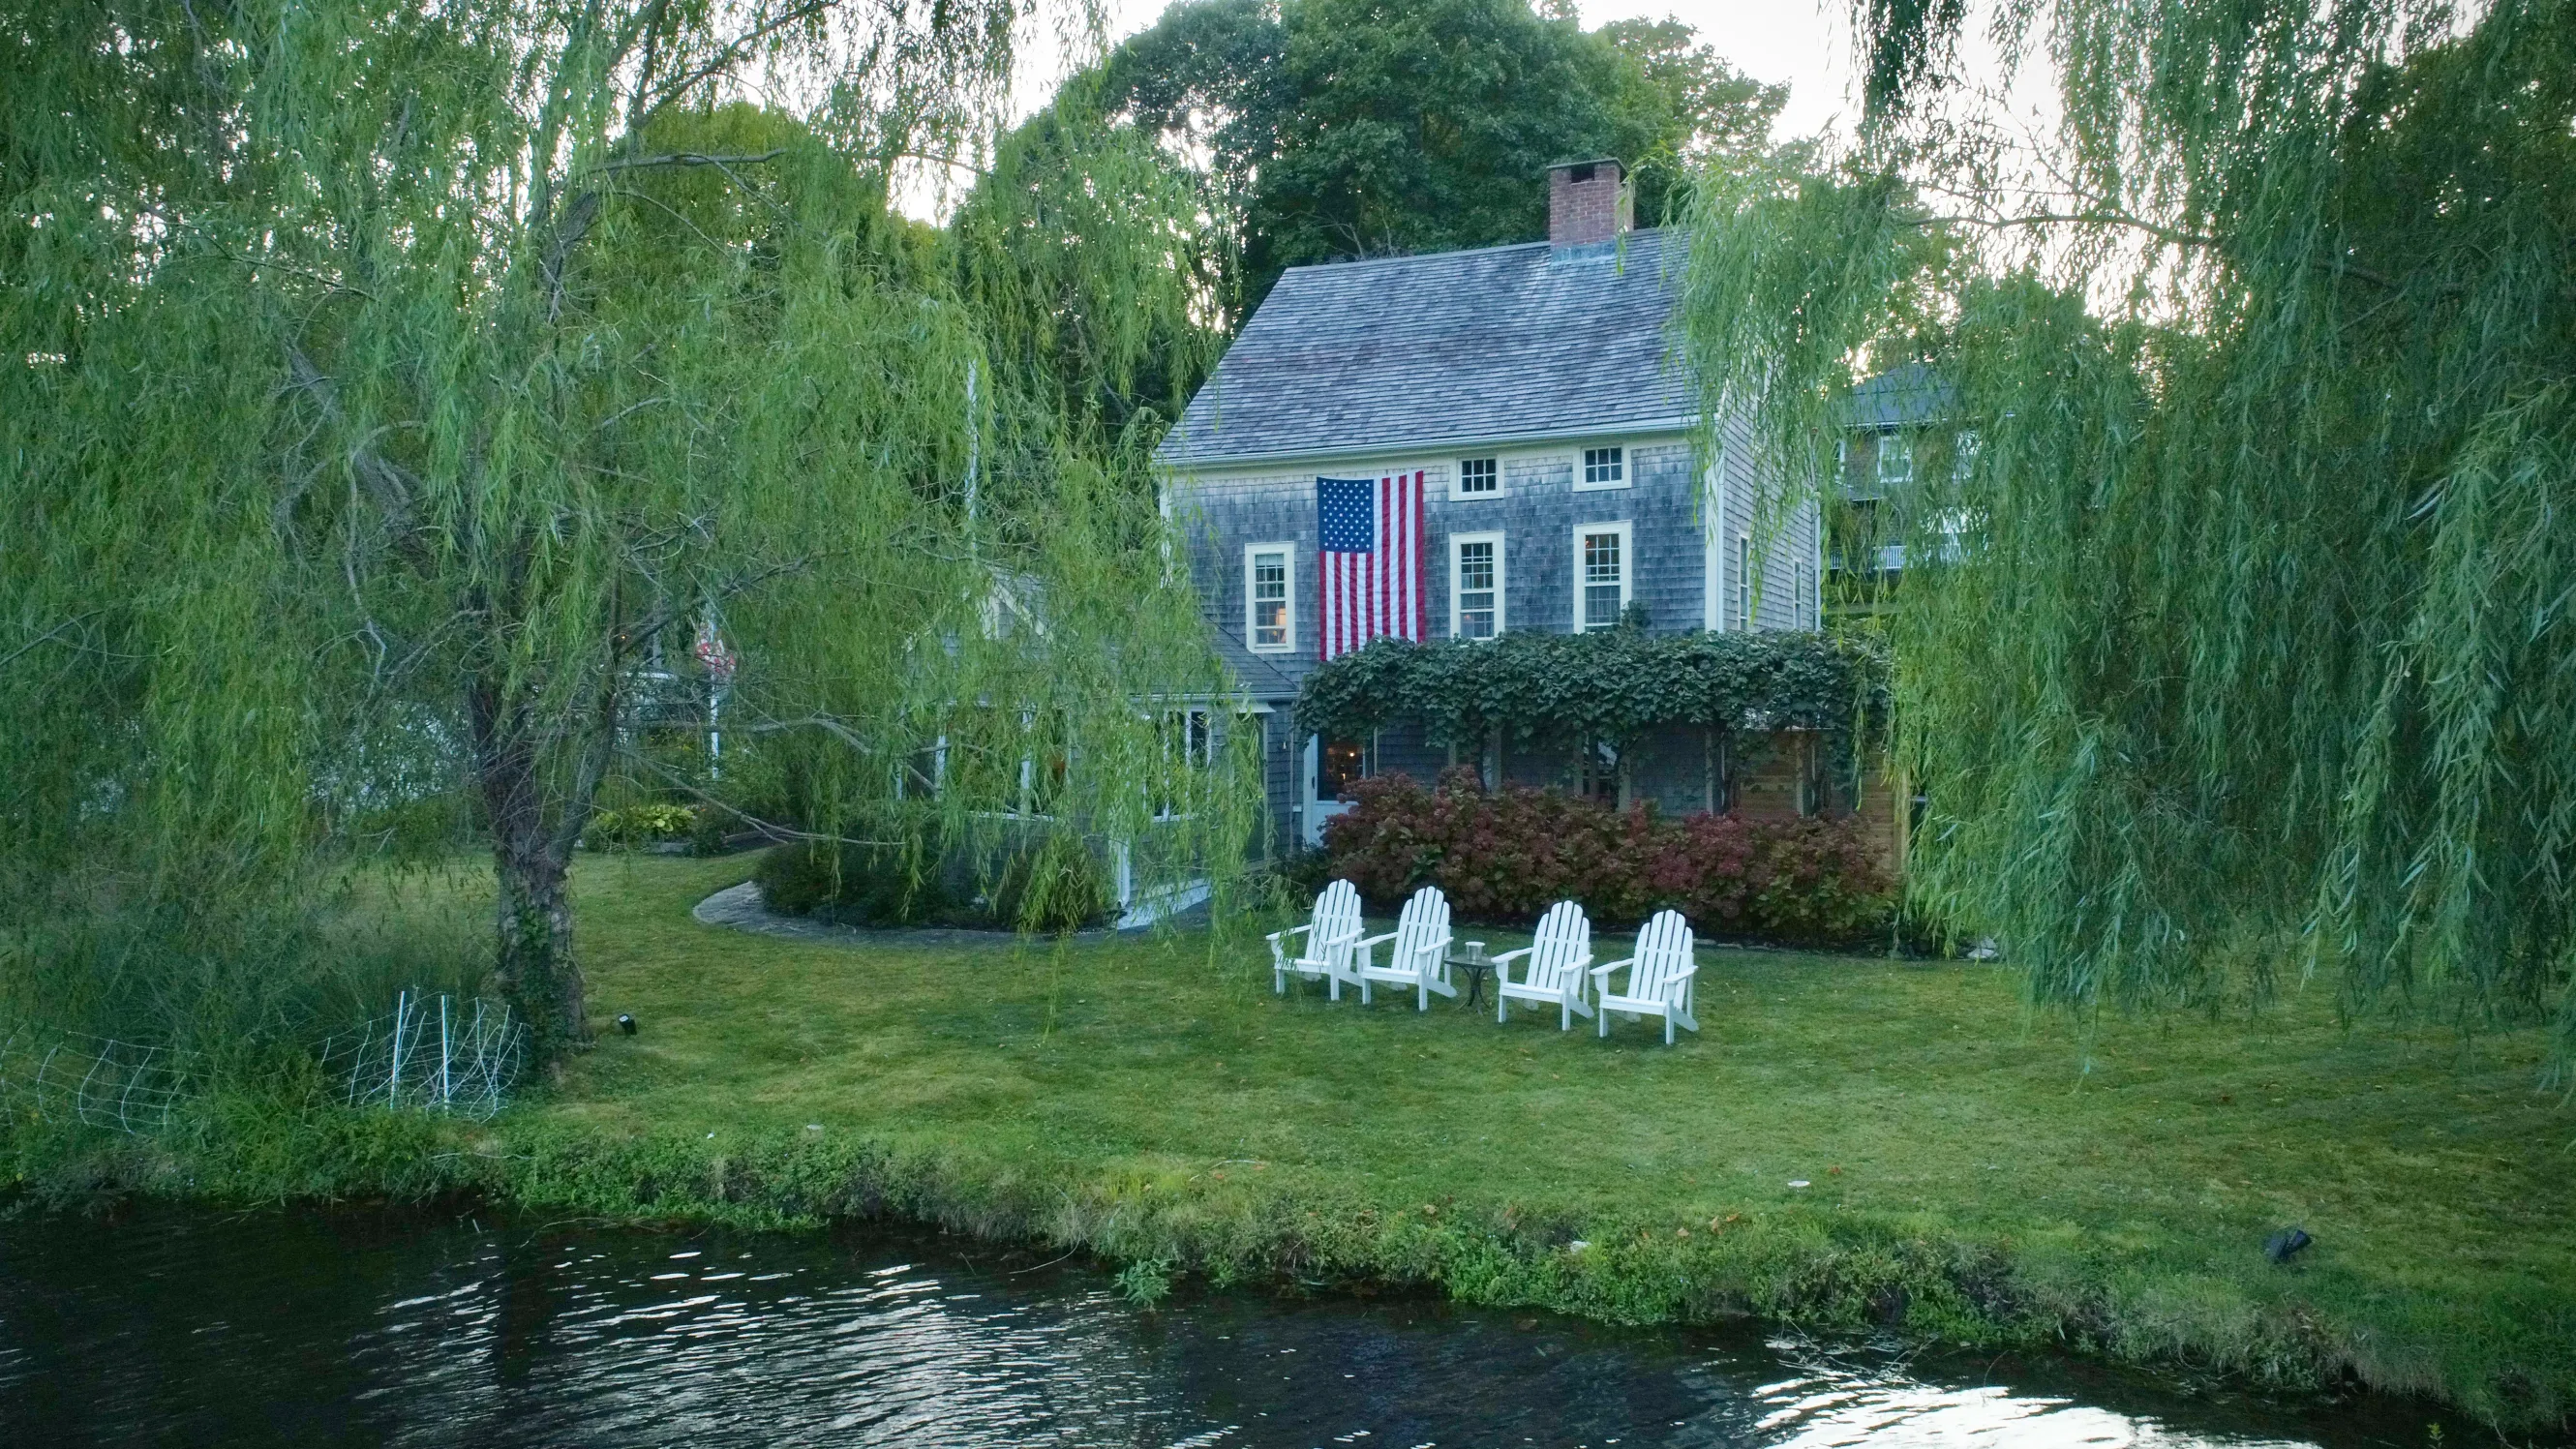 A backyard exterior shot of the home, showing a pond in the foreground with a backyard and four white Adirondack chairs with the house in the background, donning an American flag hanging from the second floor.